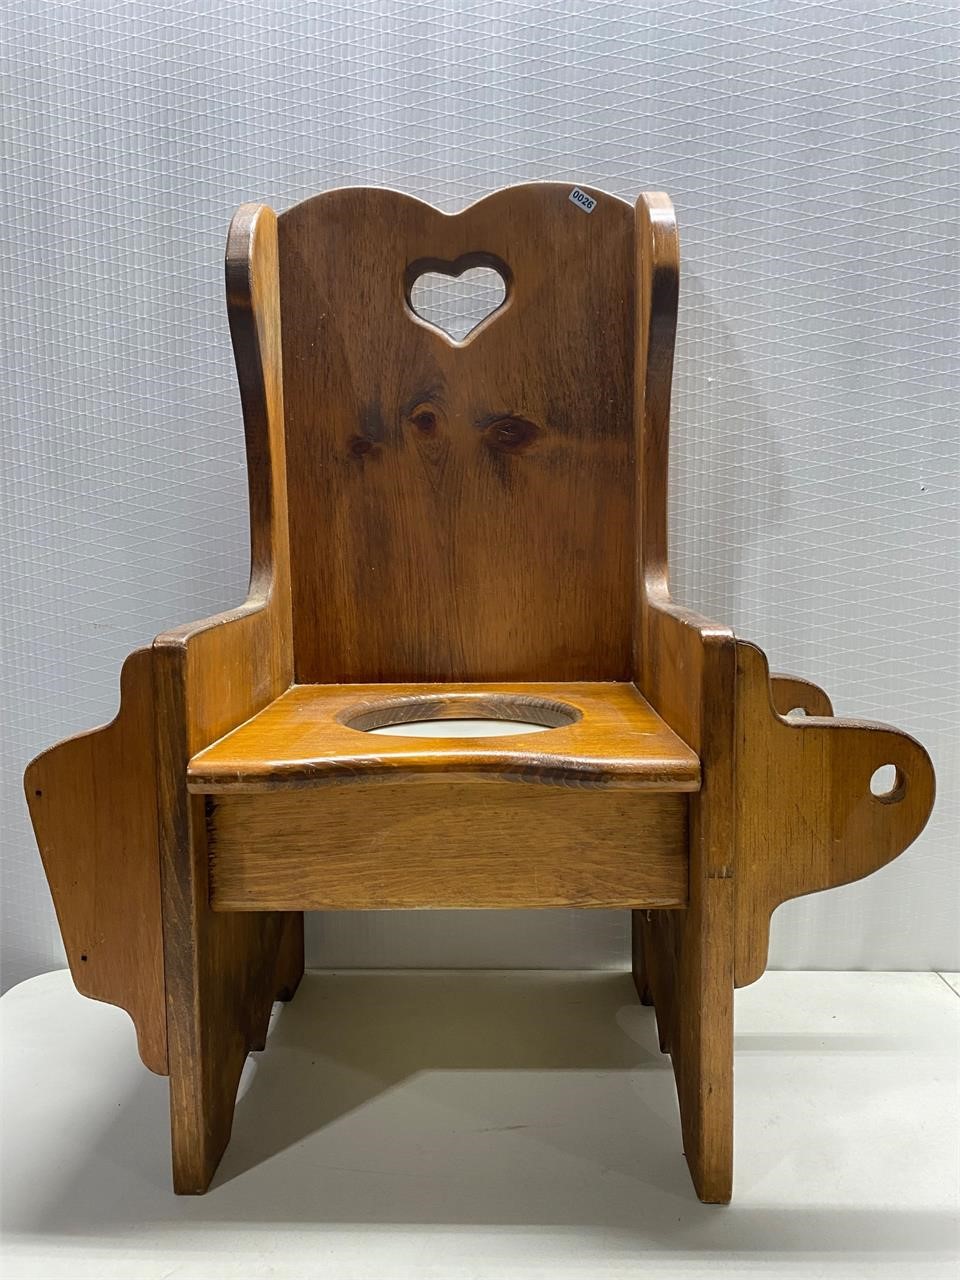 Antique wooden potty chair